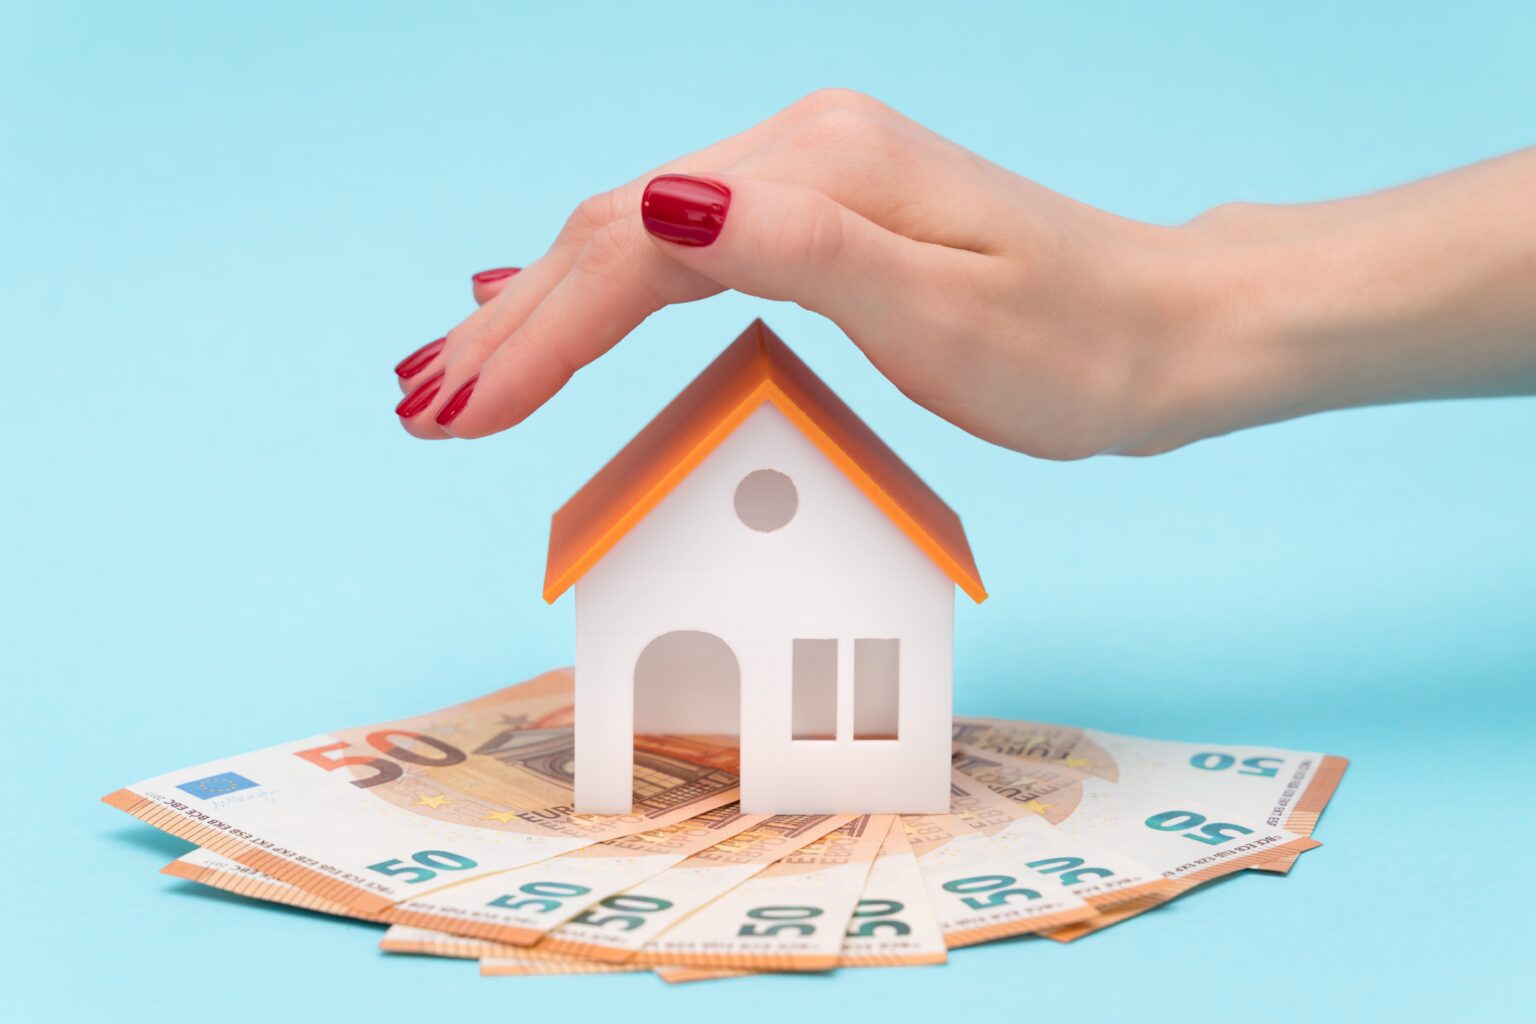 a woman's hand over the roof of the toy house on a blue background with free space for text